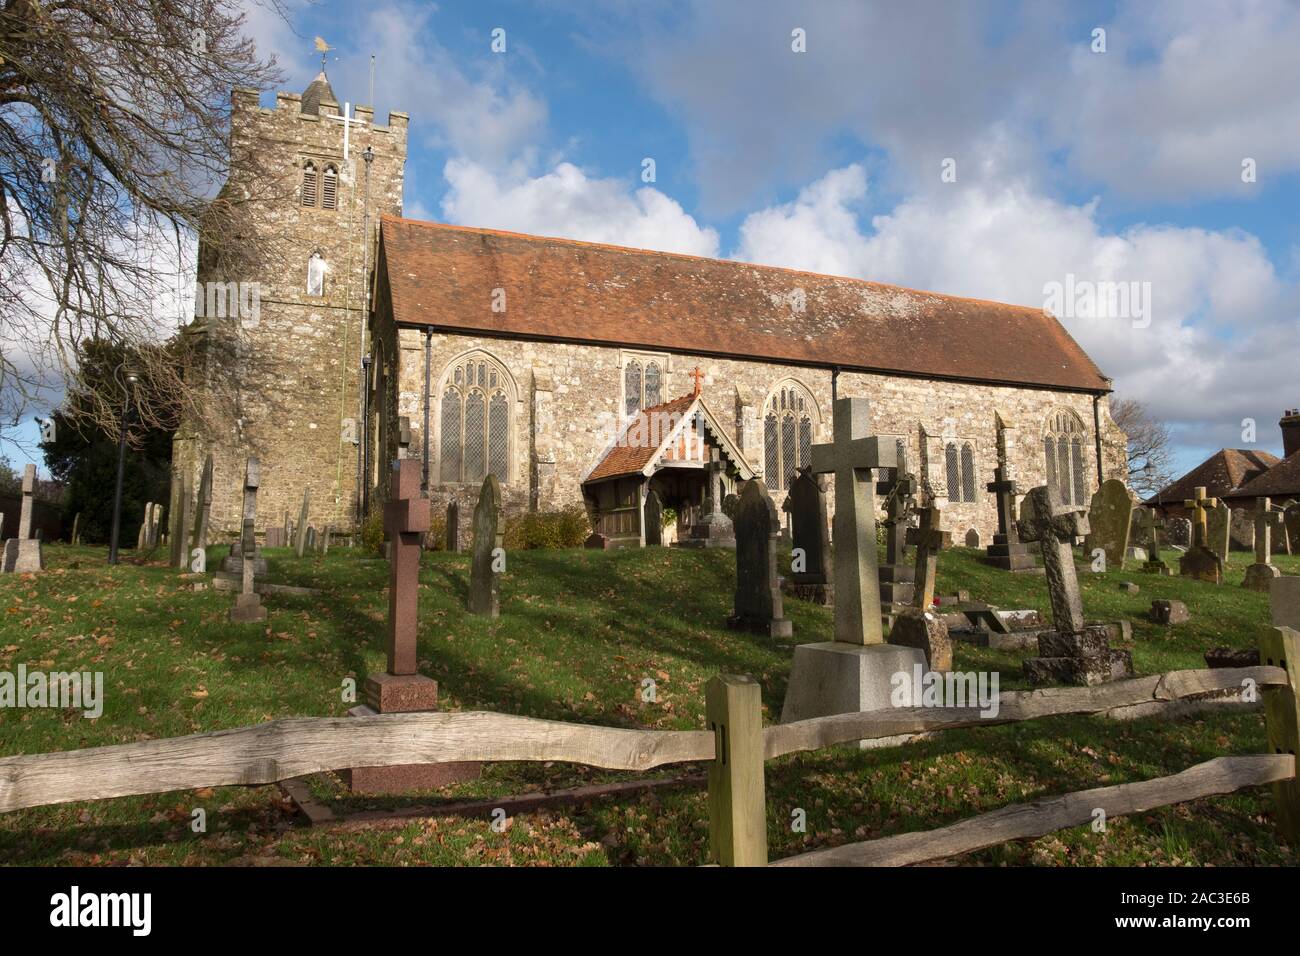 St George's Church, Heyd, East Sussex, UK Banque D'Images